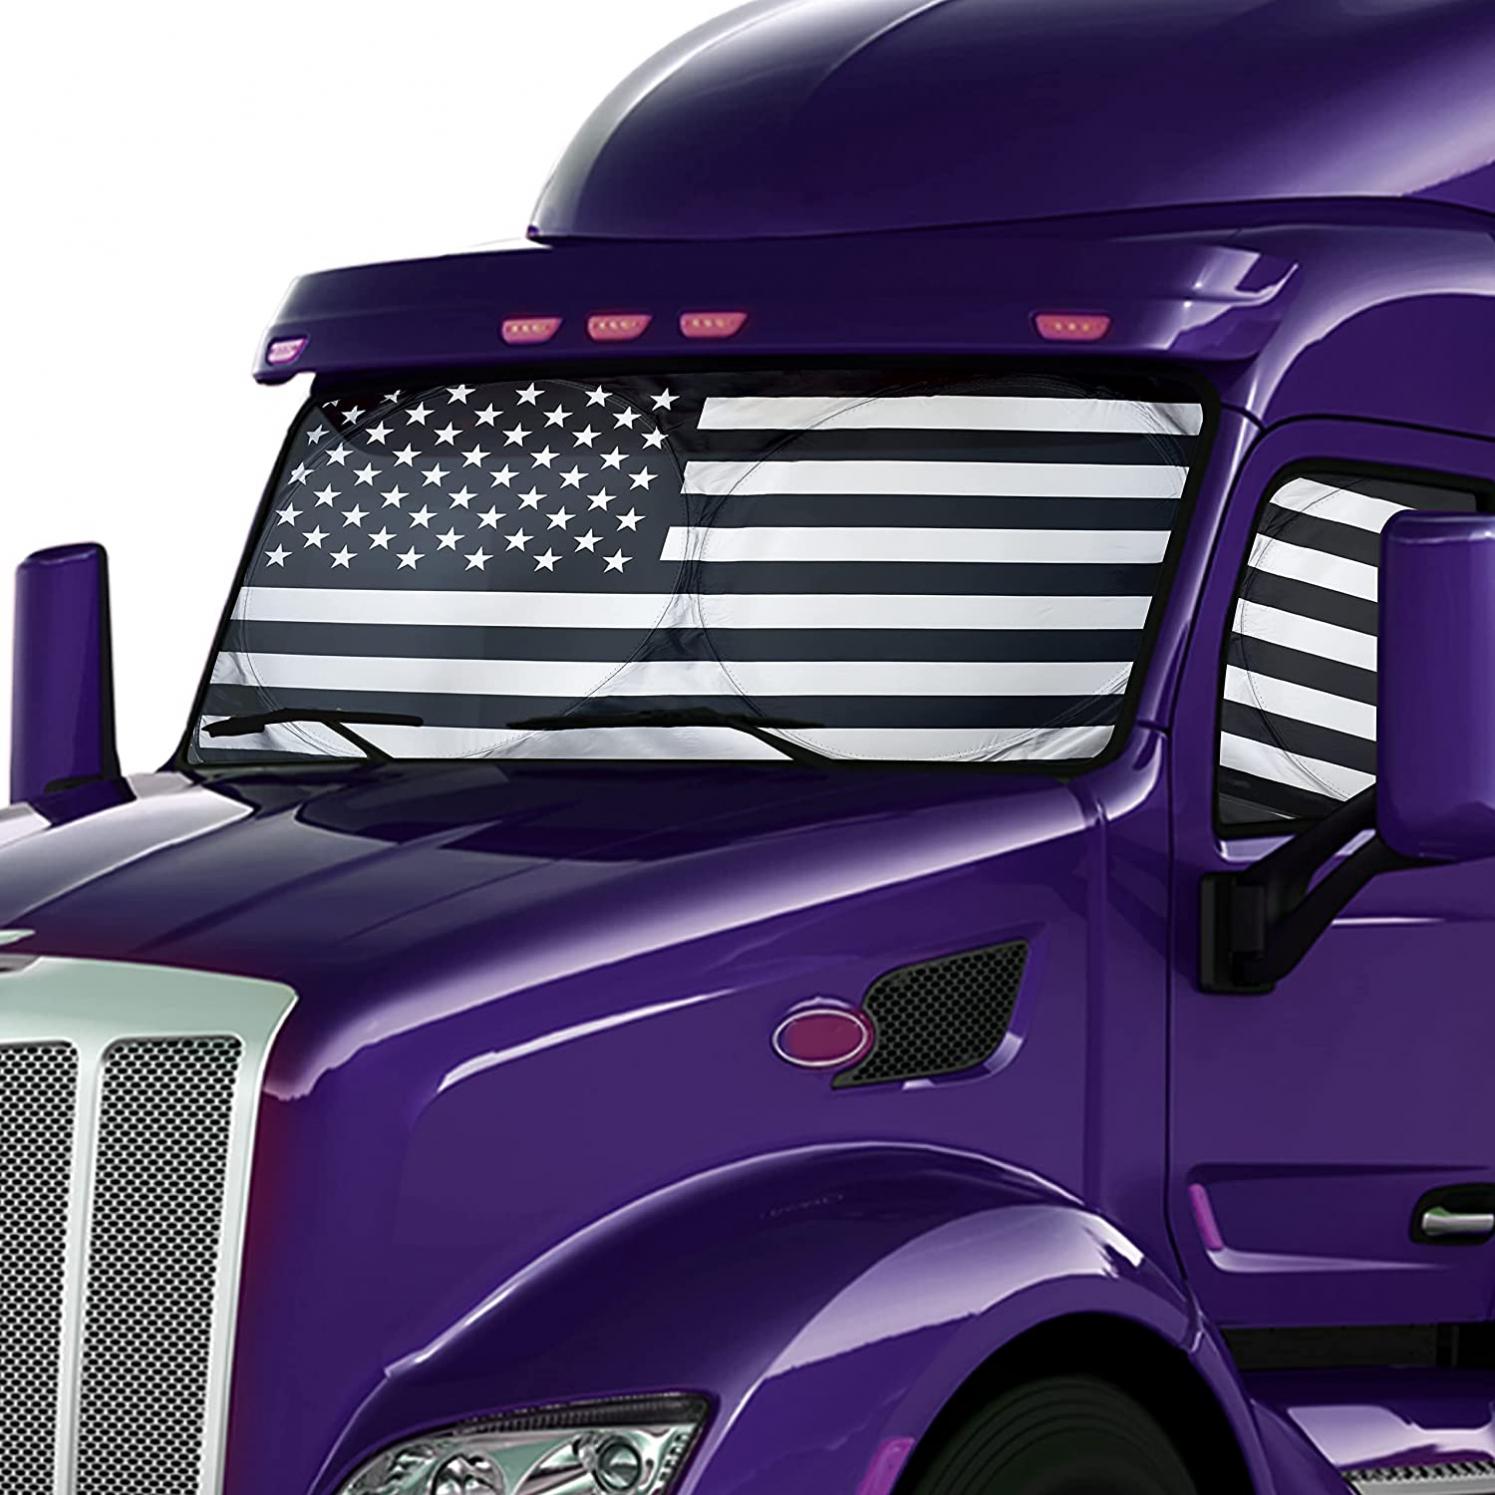 EcoNour Semi-Truck Patriotic Flag Printed Sun Shade for Windshield and Side Windows | 240T Sunshade for Truck Windshield to Block UV/Sun Heat Rays | Best for Semi, Commercial & Big Rig Truck